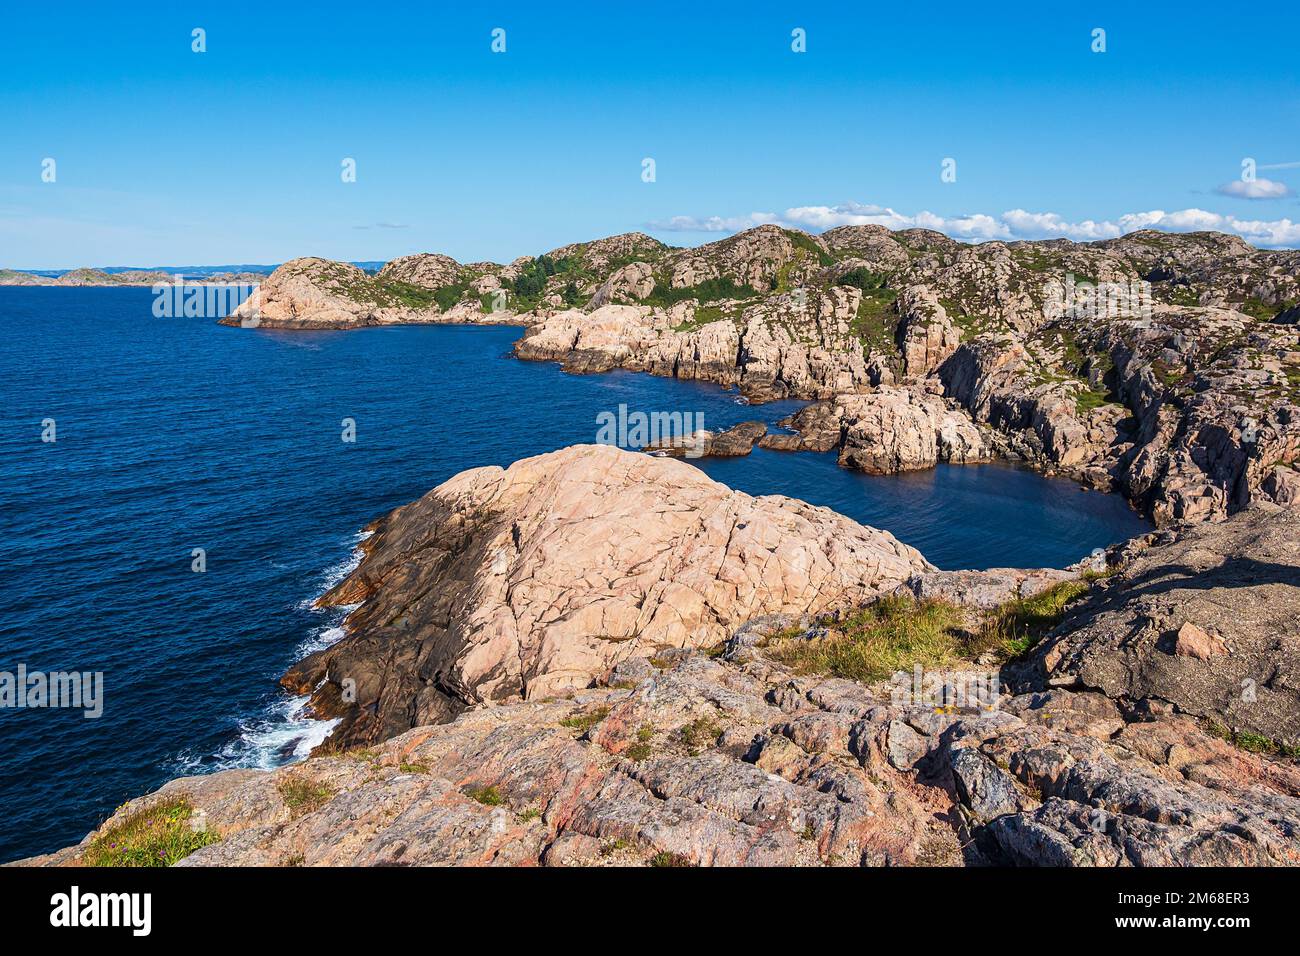 Landscape On Lindesnes Peninsula In Norway. Stock Photo